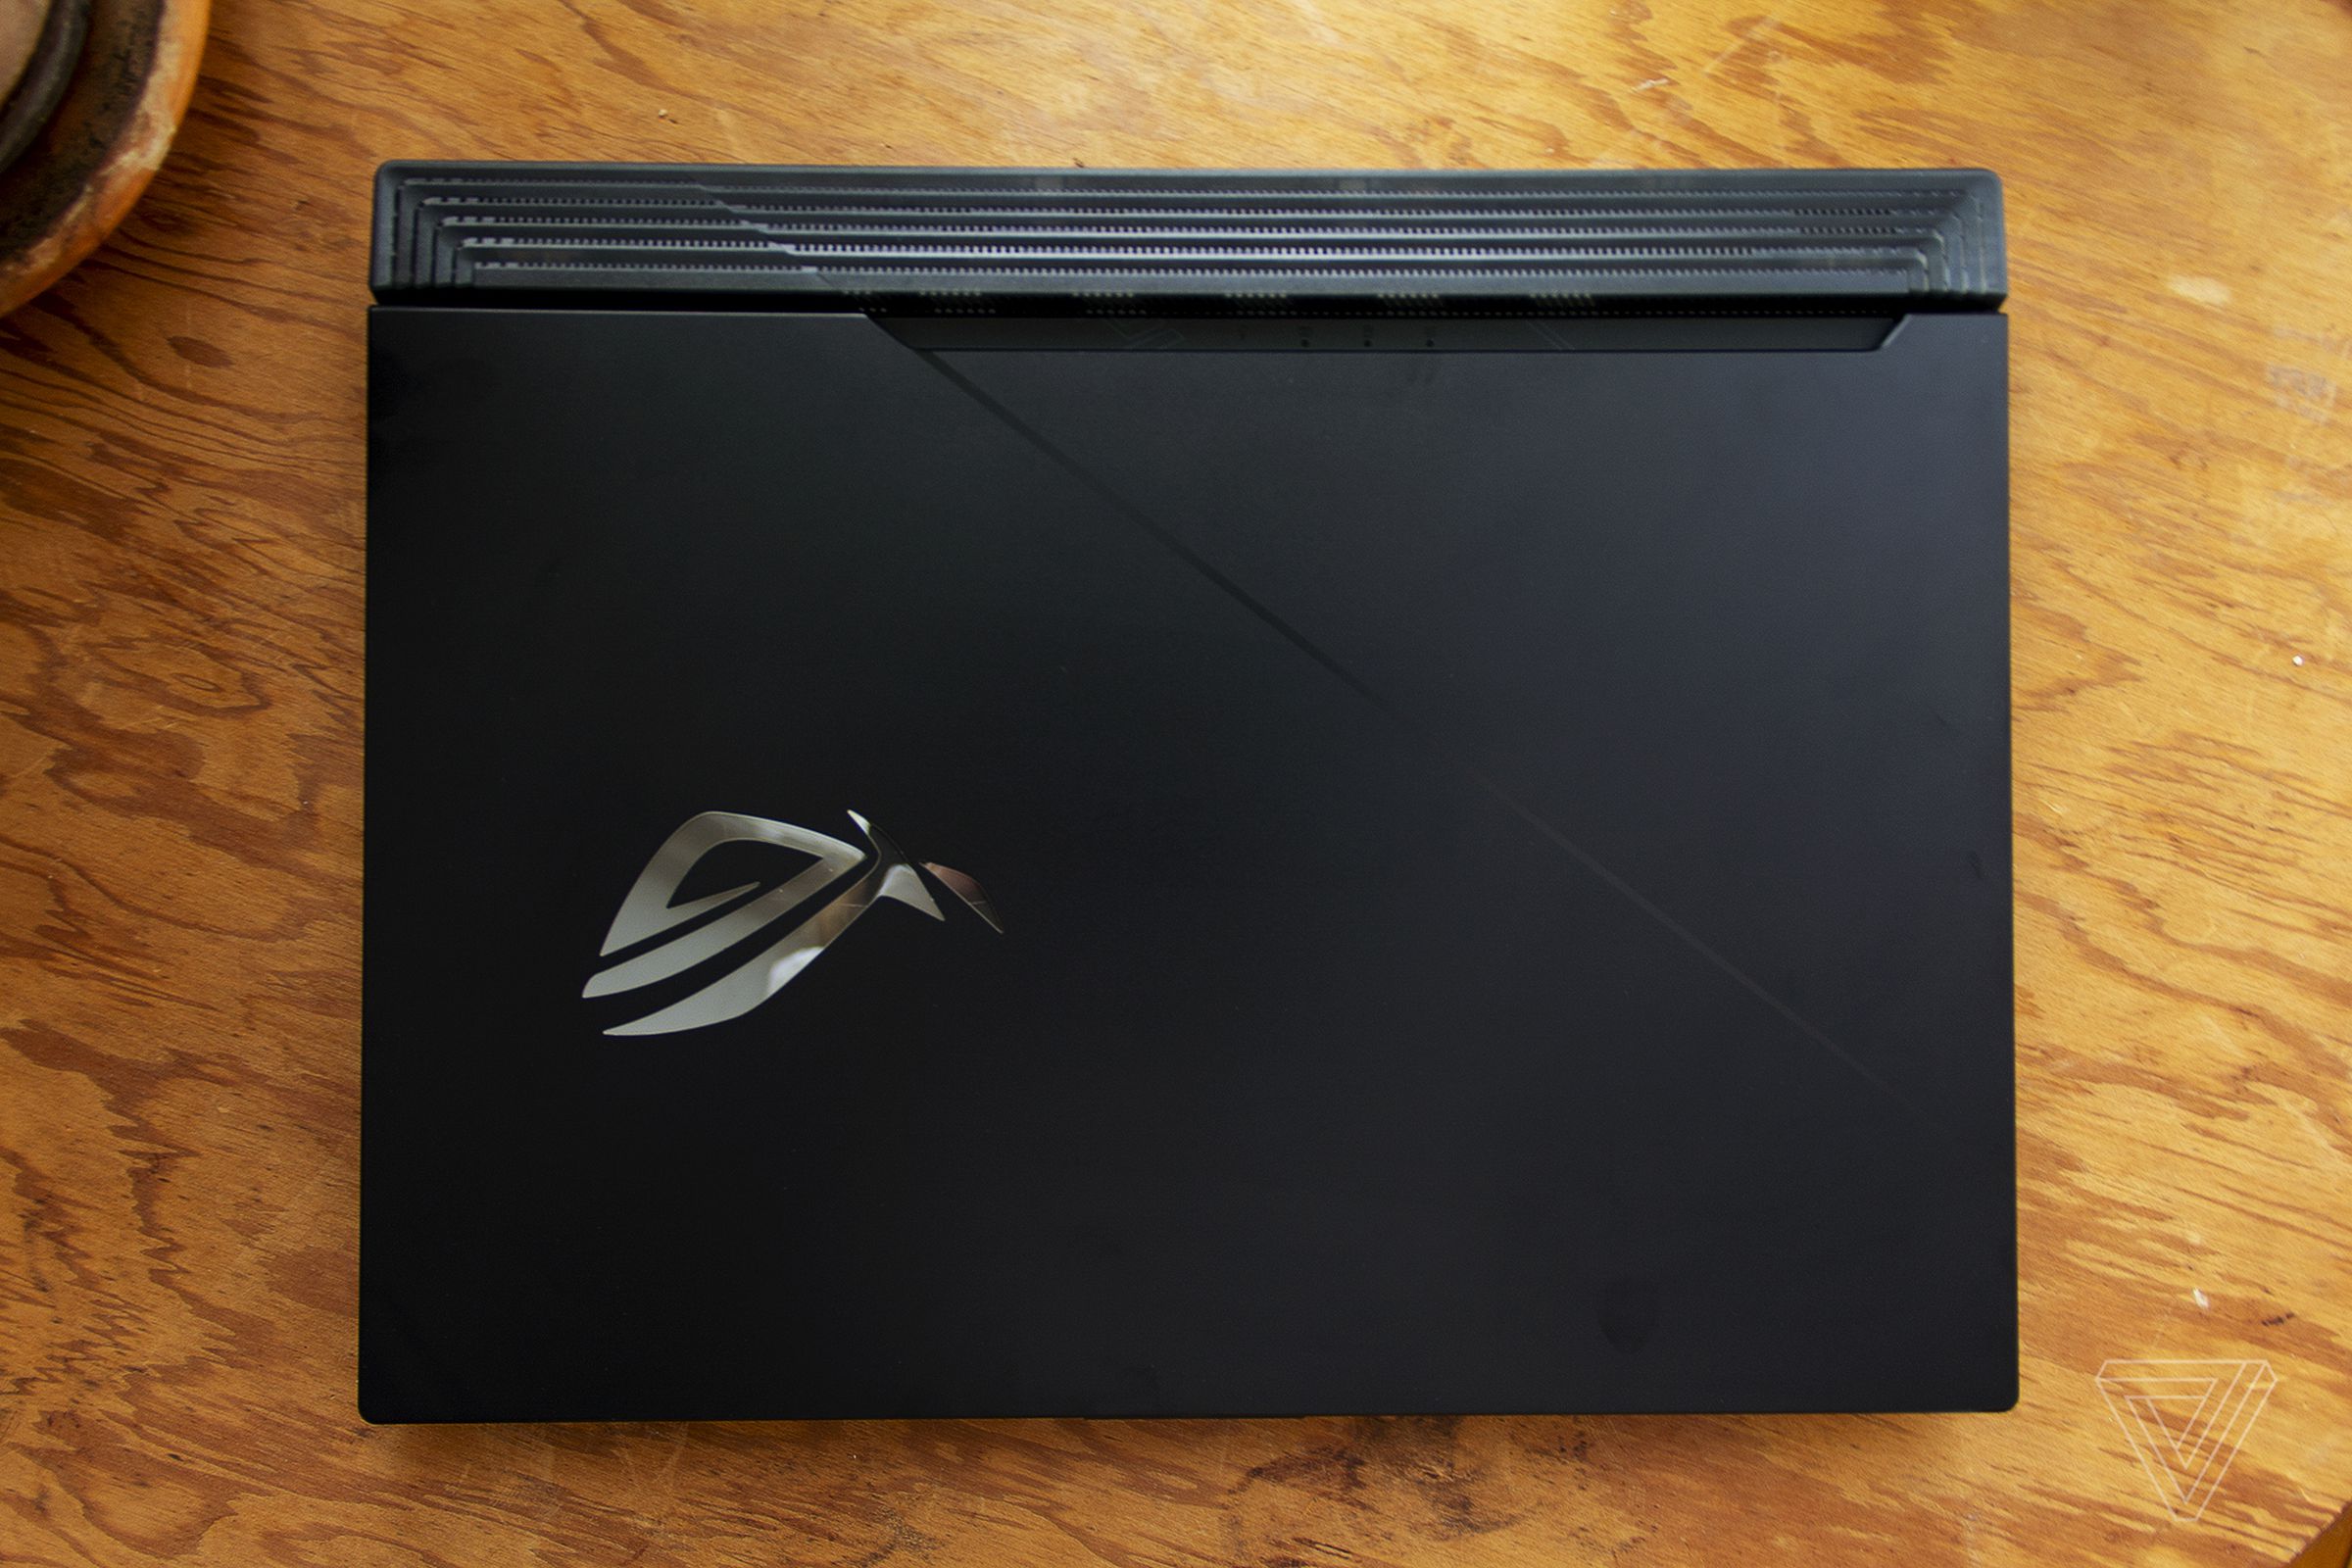 The lid of the Asus ROG Strix Scar 15 from above.